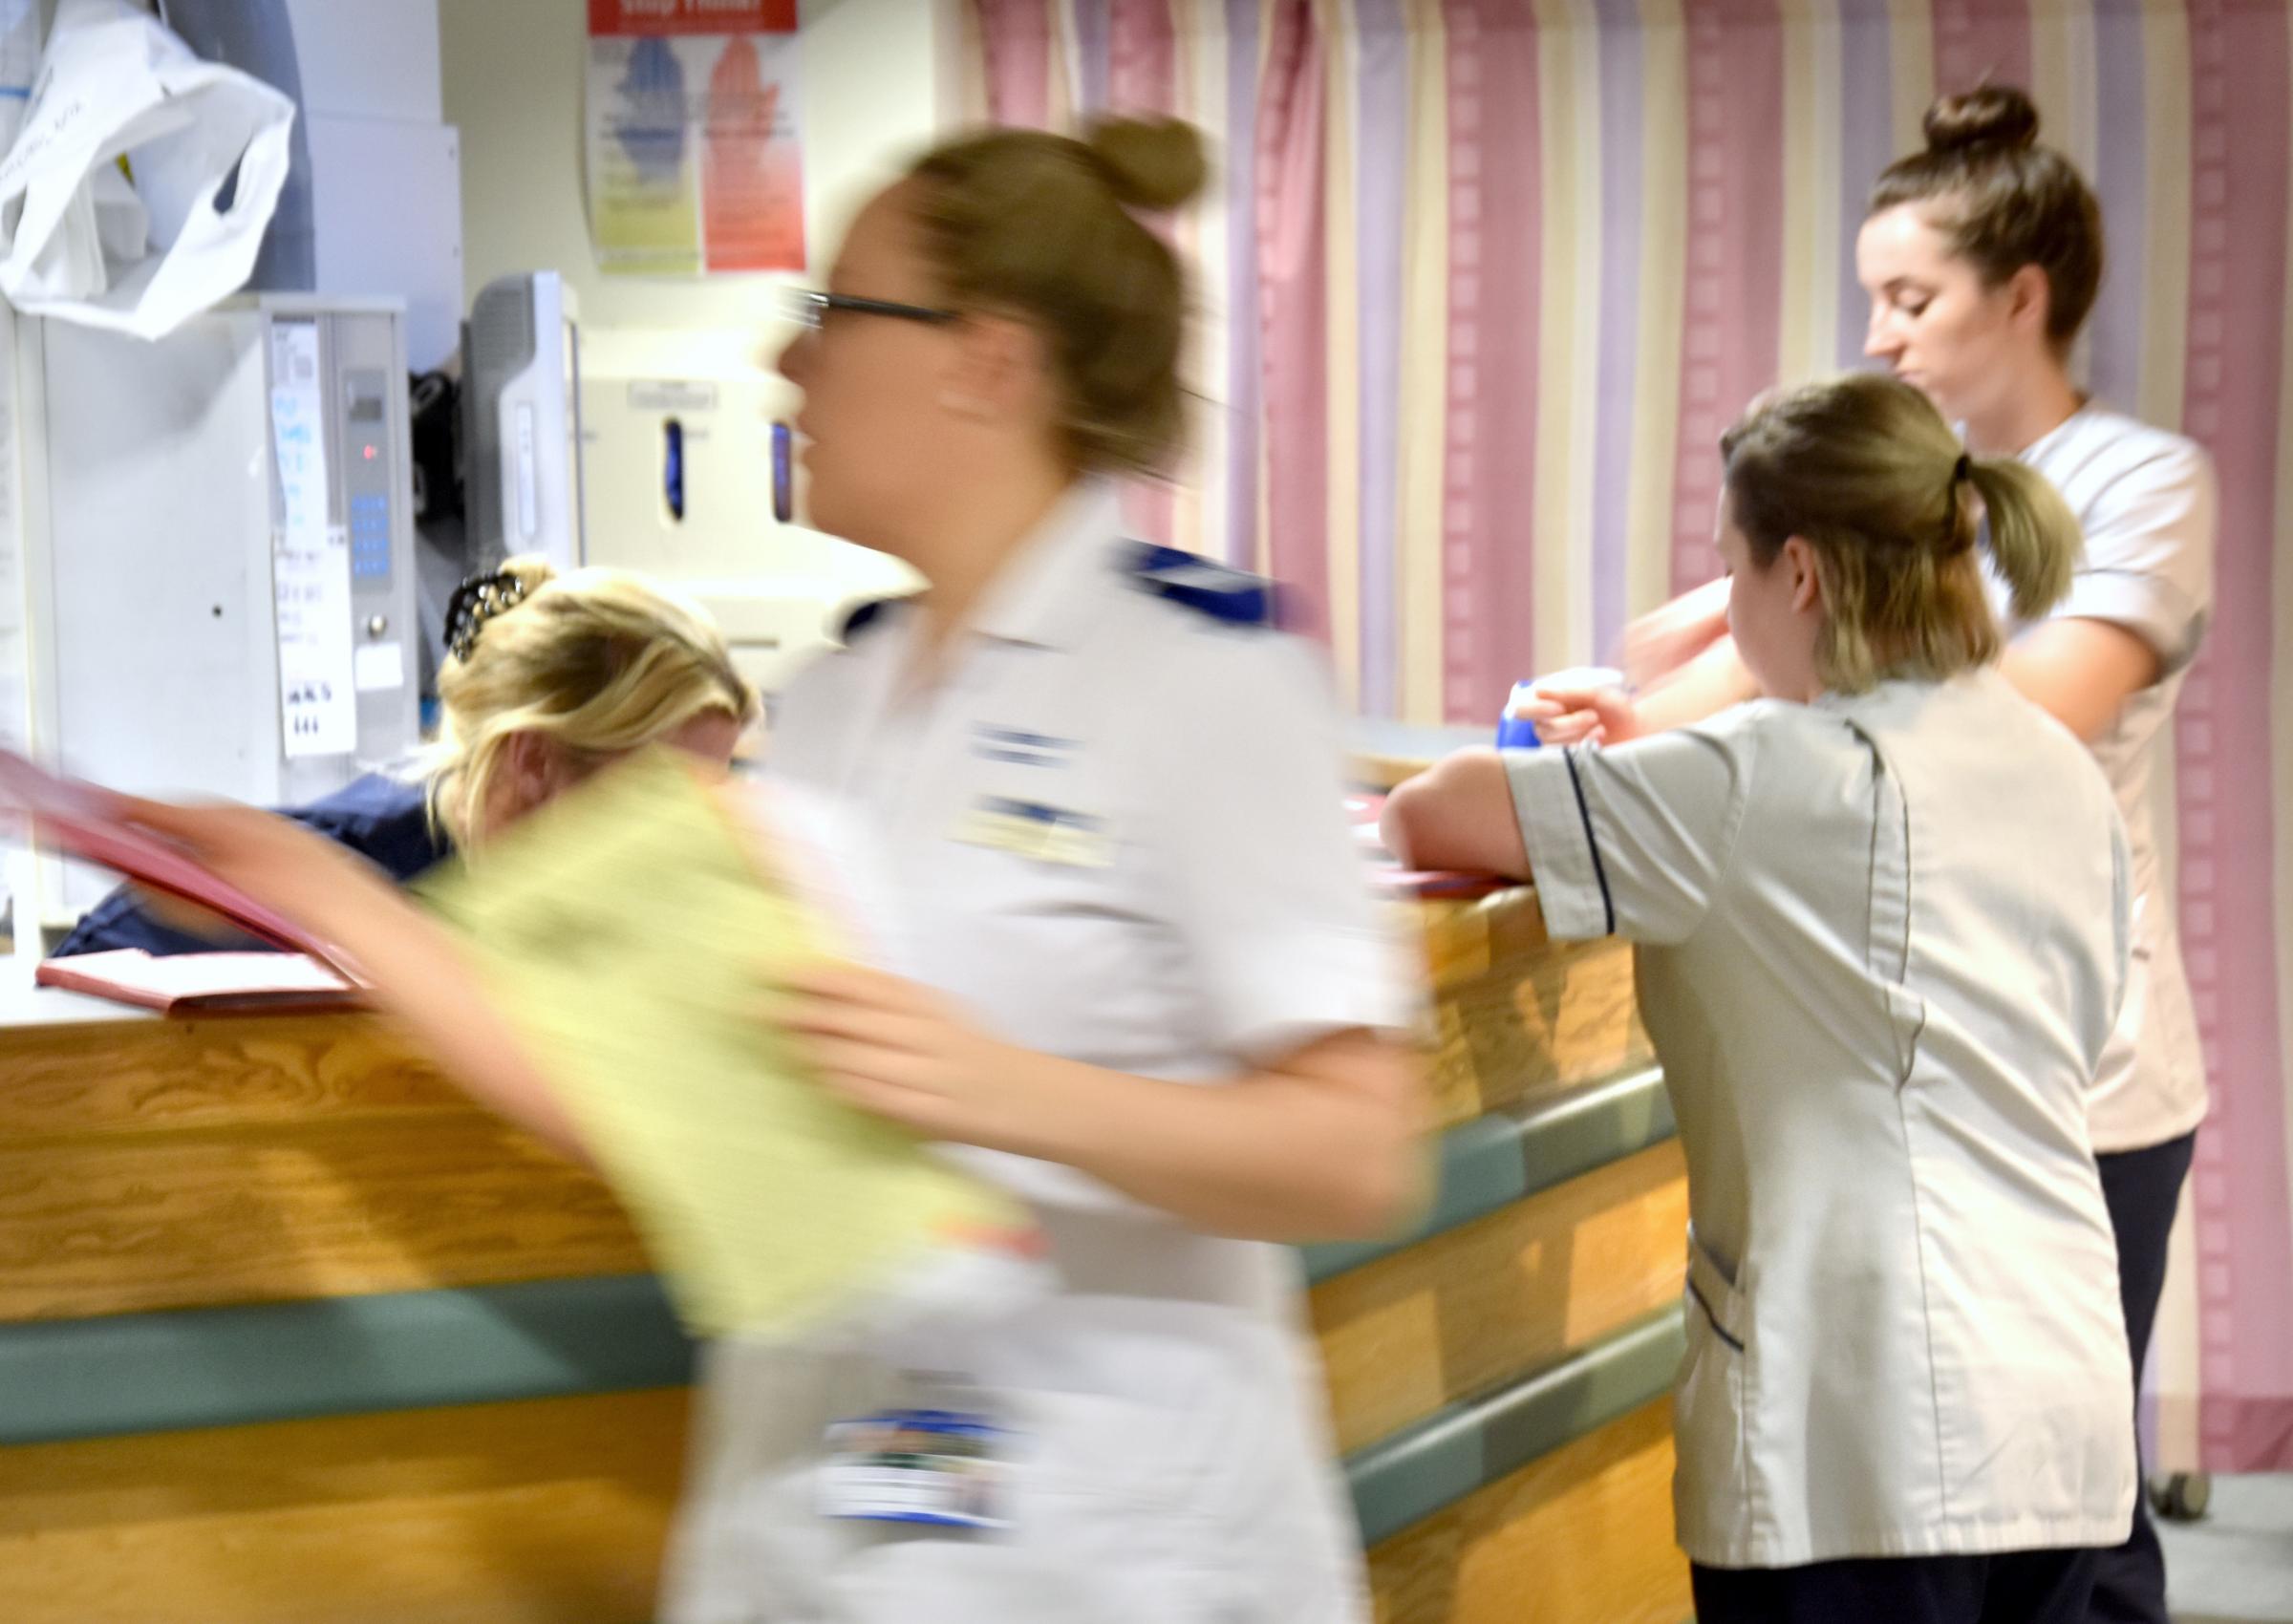 More than 1,400 patients wait longer than four hours in A&E at York trust